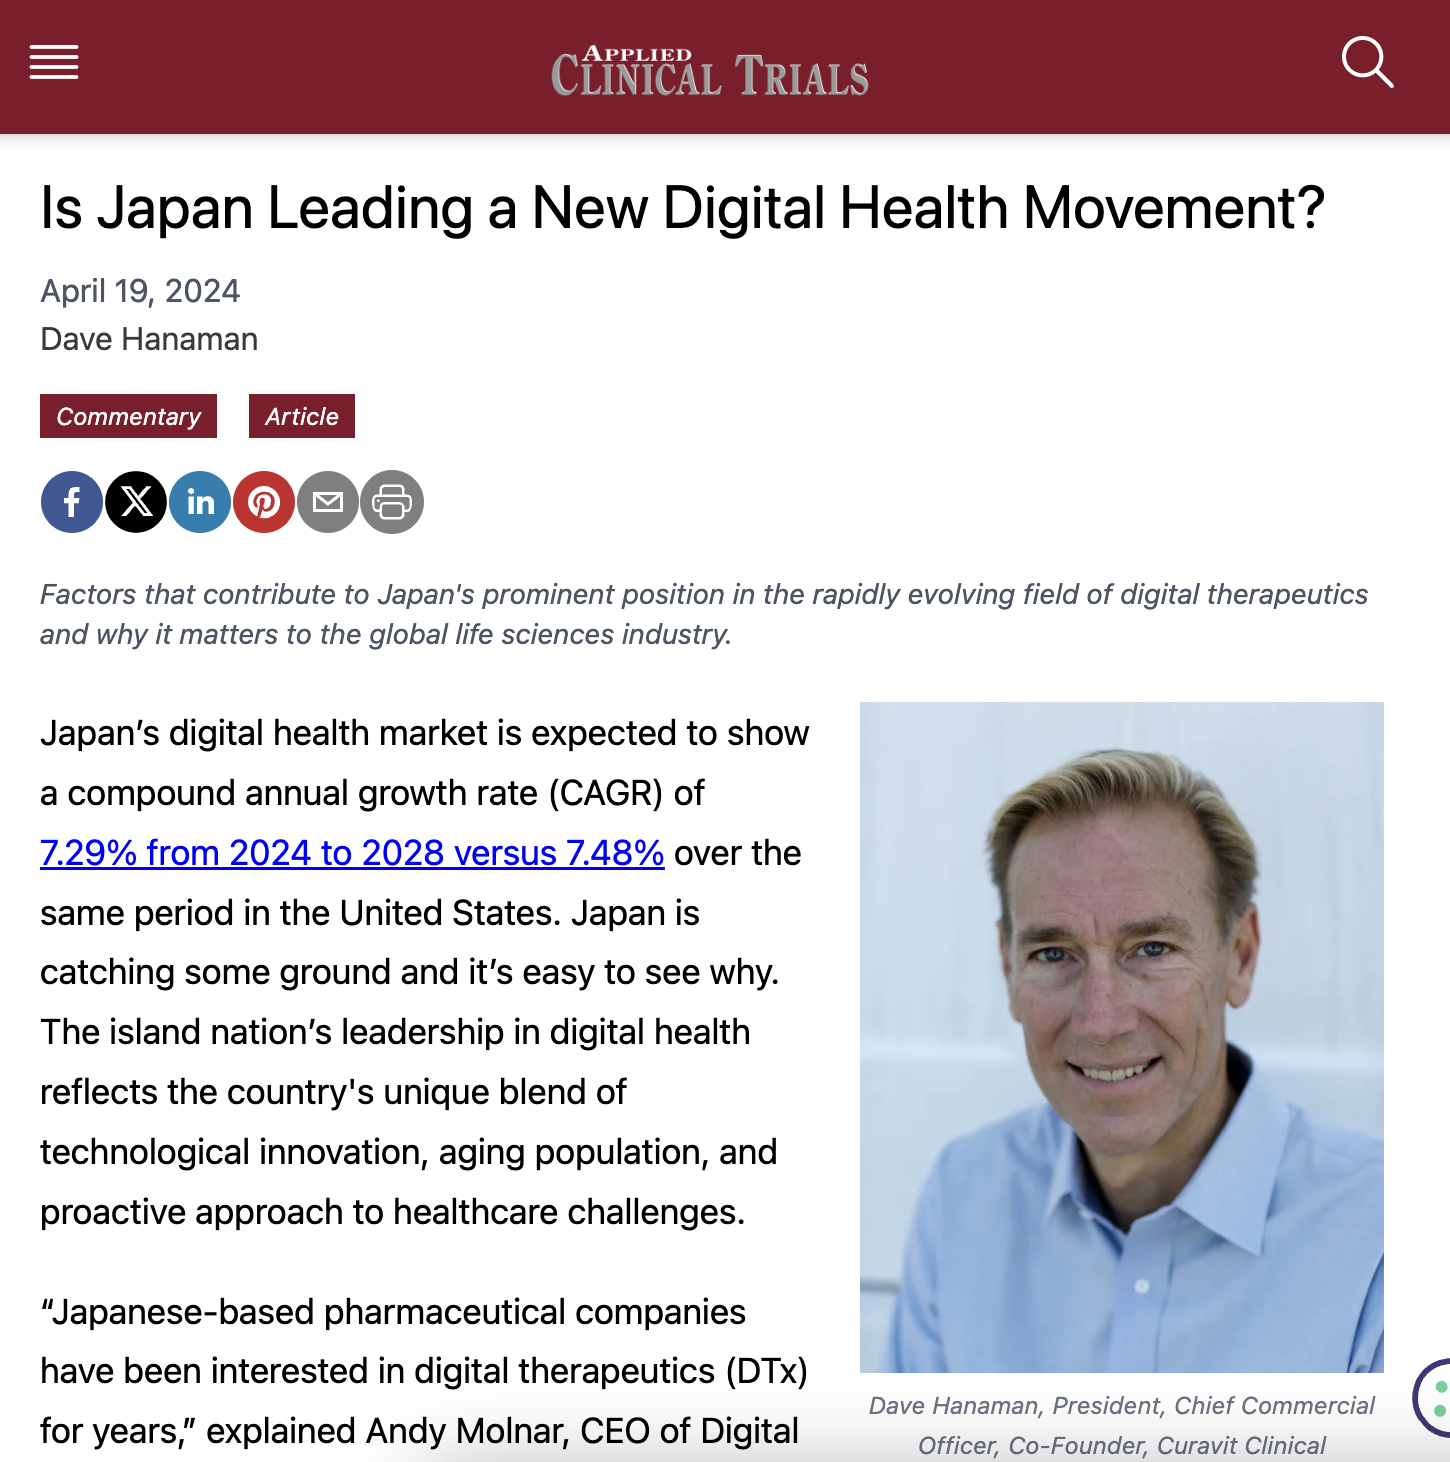 Is Japan Leading a New Digital Health Movement?